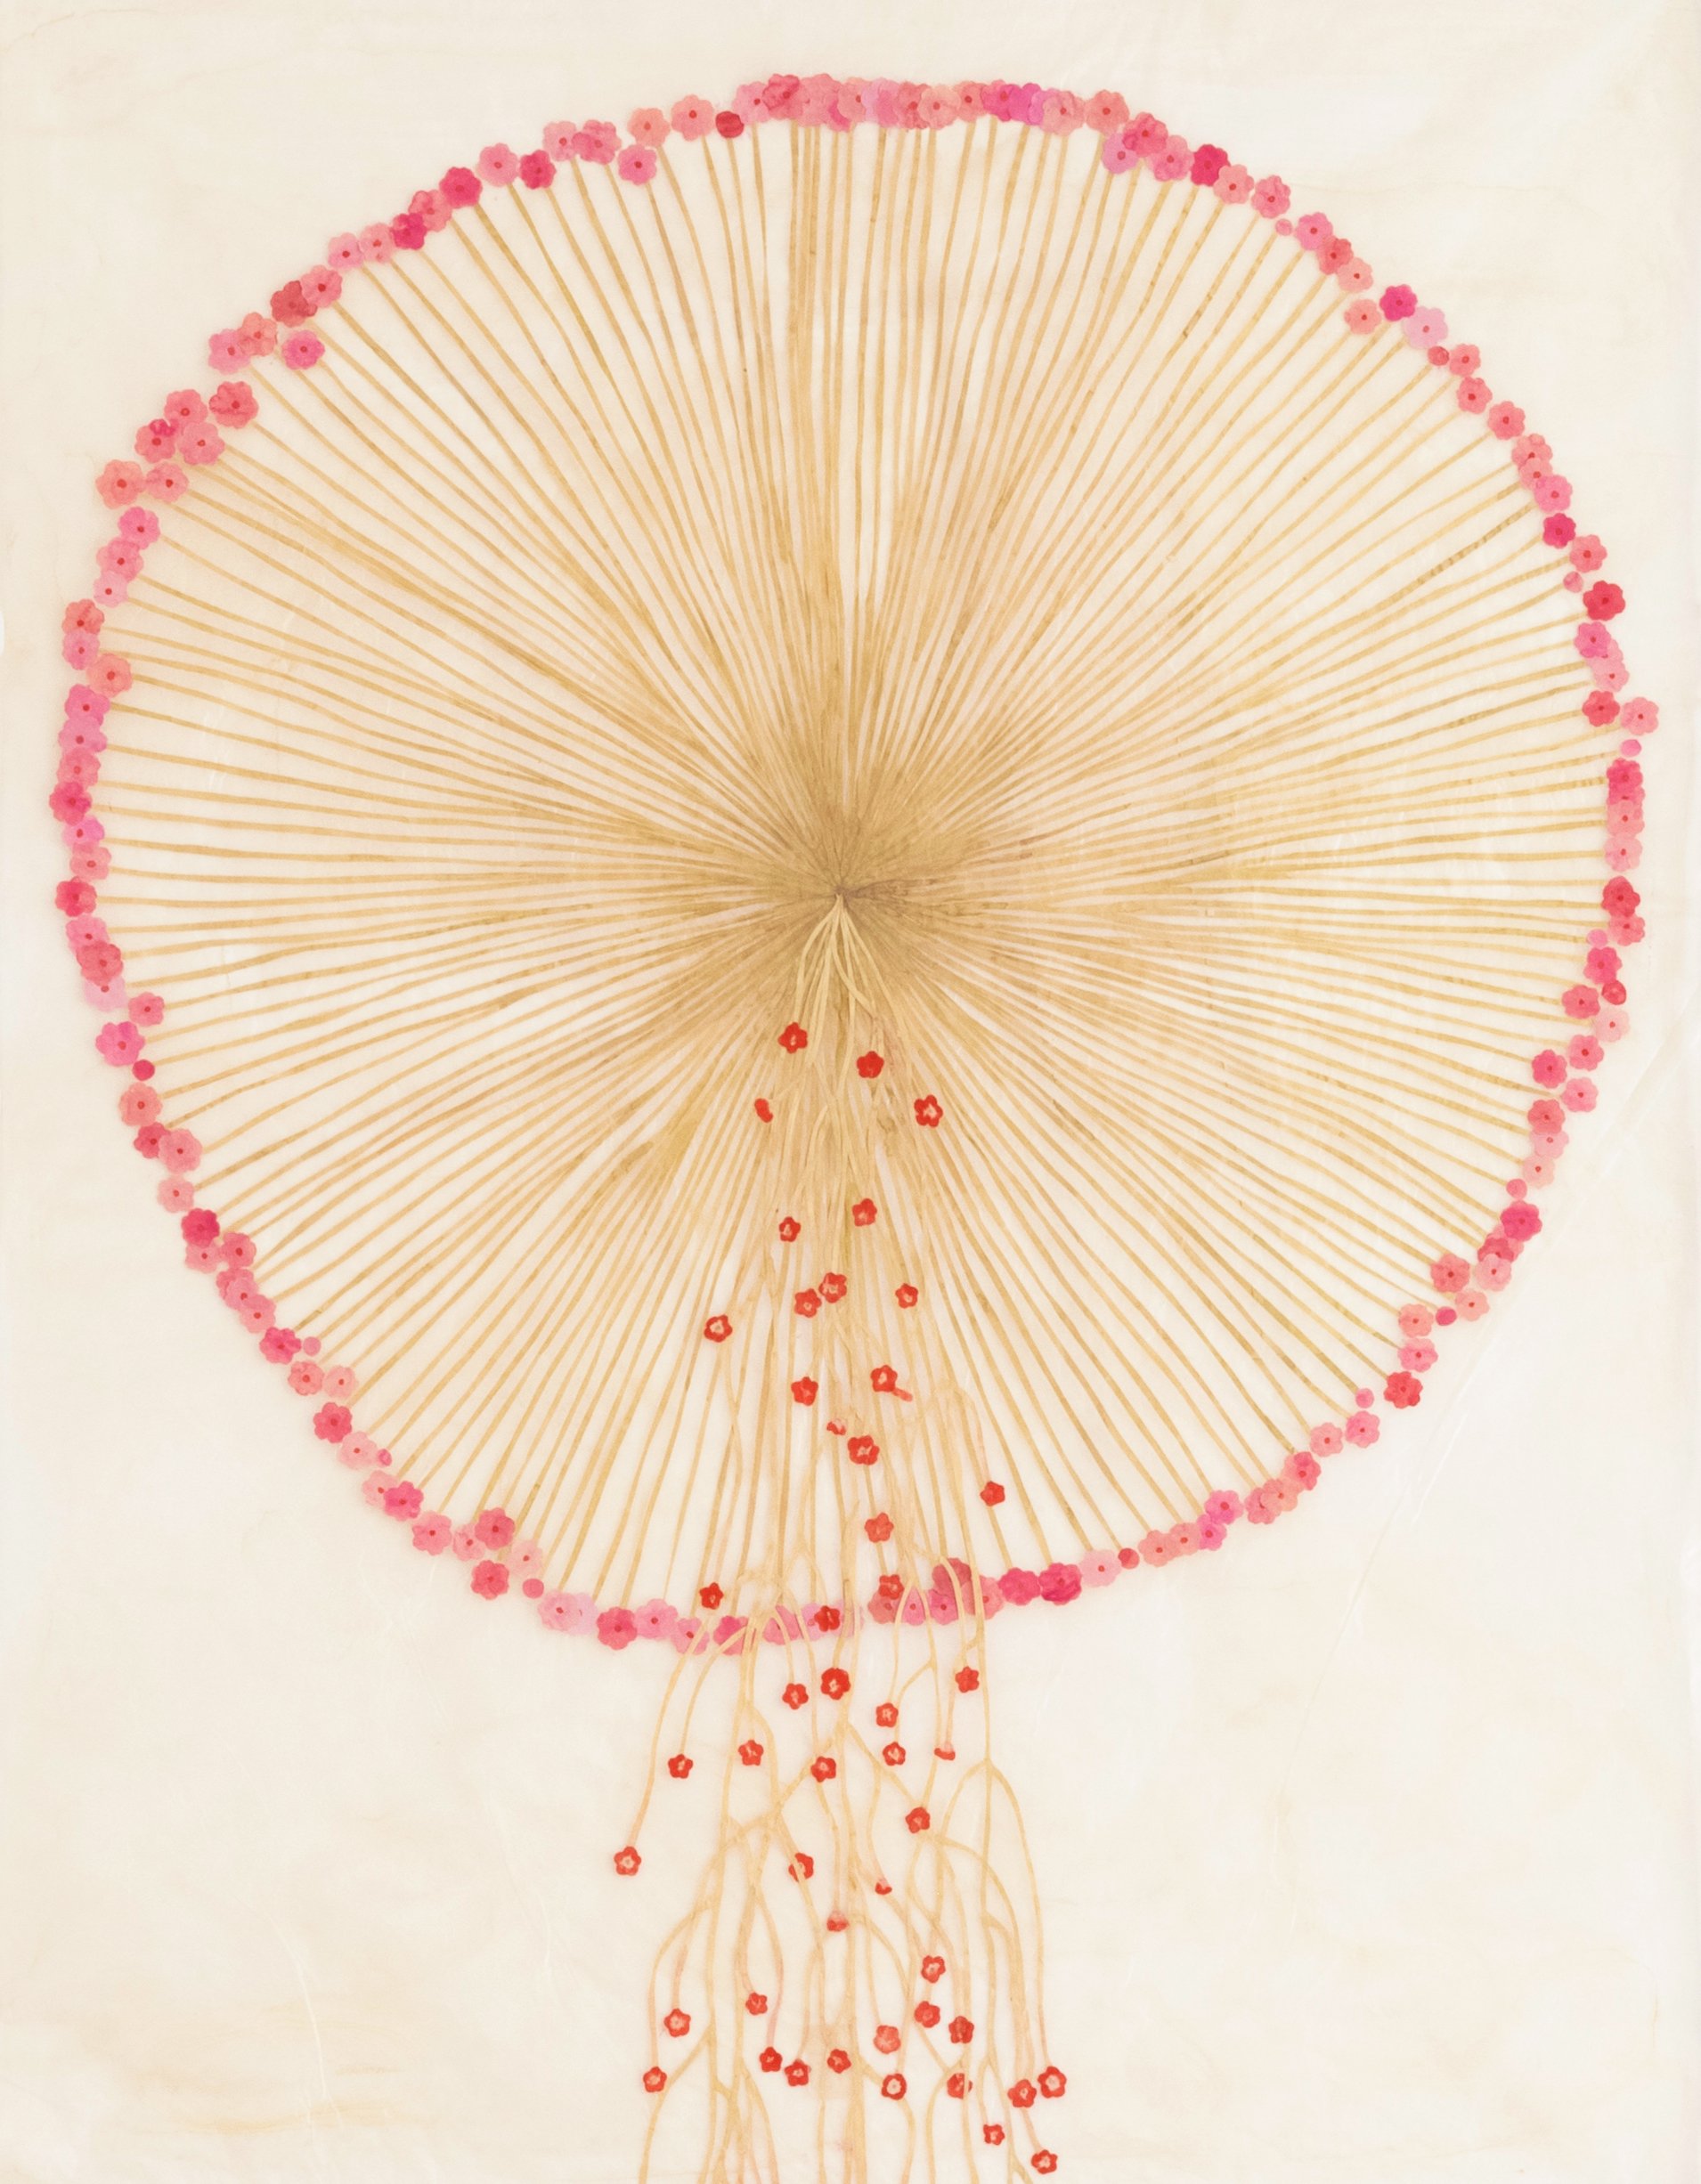 Fumi Imamura, Circle and root, 2022, collage, watercolor on paper, 163 x 75 cm (64 1_8 x 29 1_2 in) (unframed), 174.5 x 86.5 cm (68 3_4 x 34 1_8 in) (framed), REF 2439.jpg